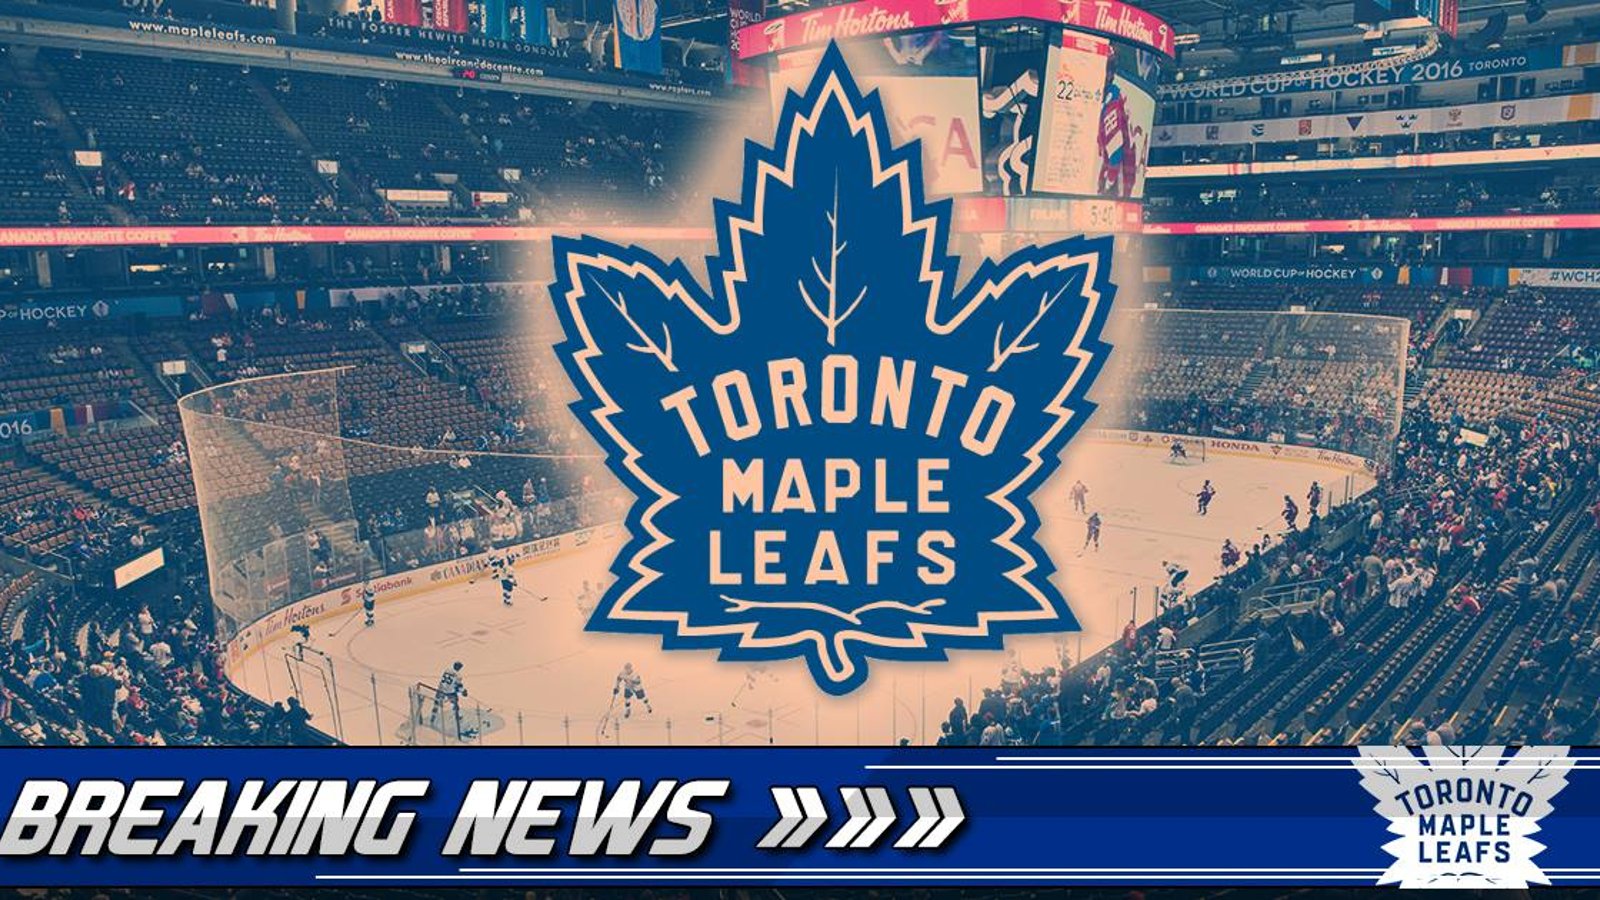 Member of the Maple Leafs arrested in crazy incident this week-end.